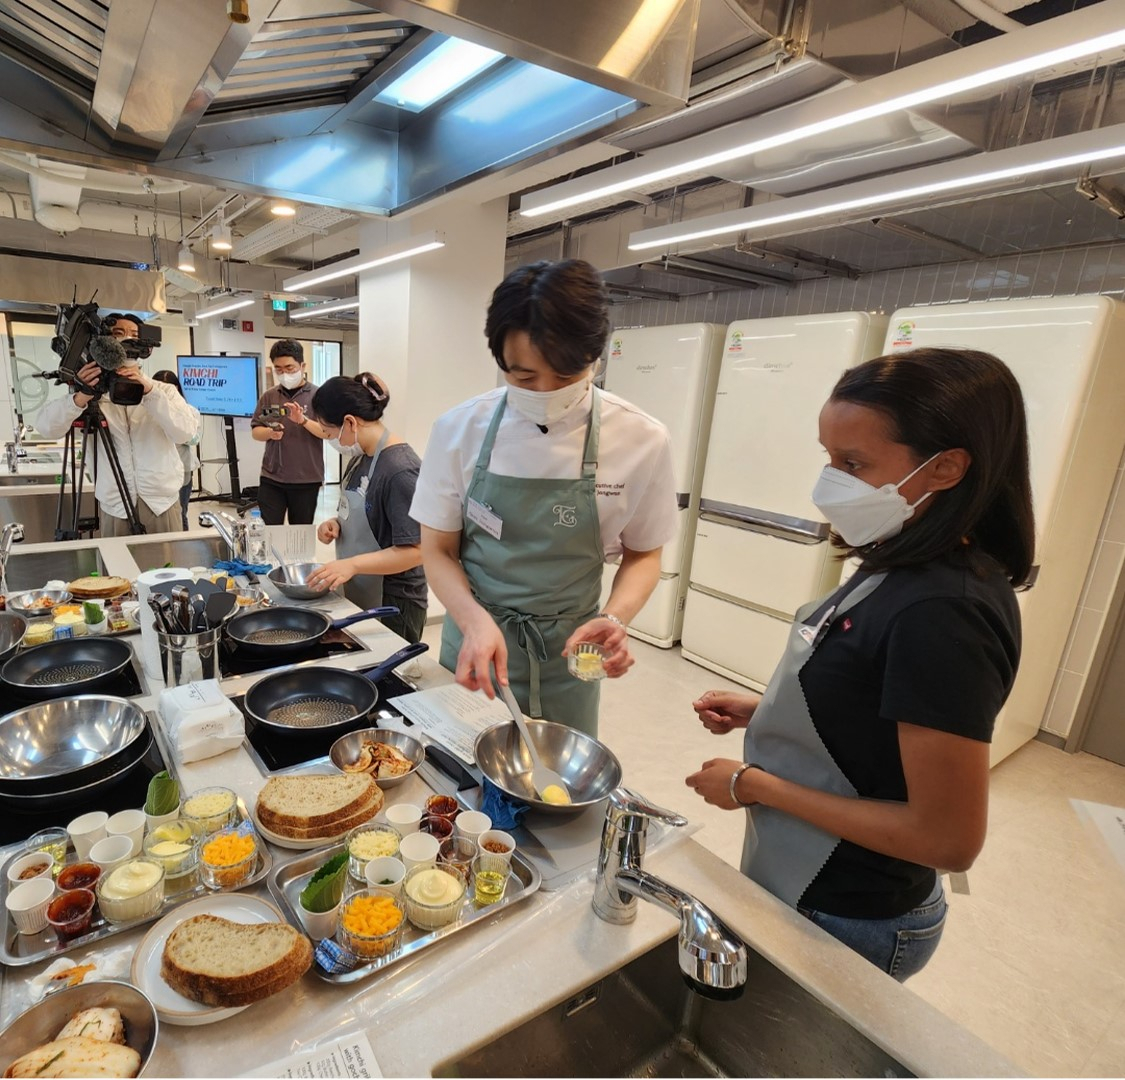 Nisha (right) is assisted by a chef as she tries her hand at making a compound butter flavored with red pepper paste. (Choi Jae-hee/The Korea Herald)